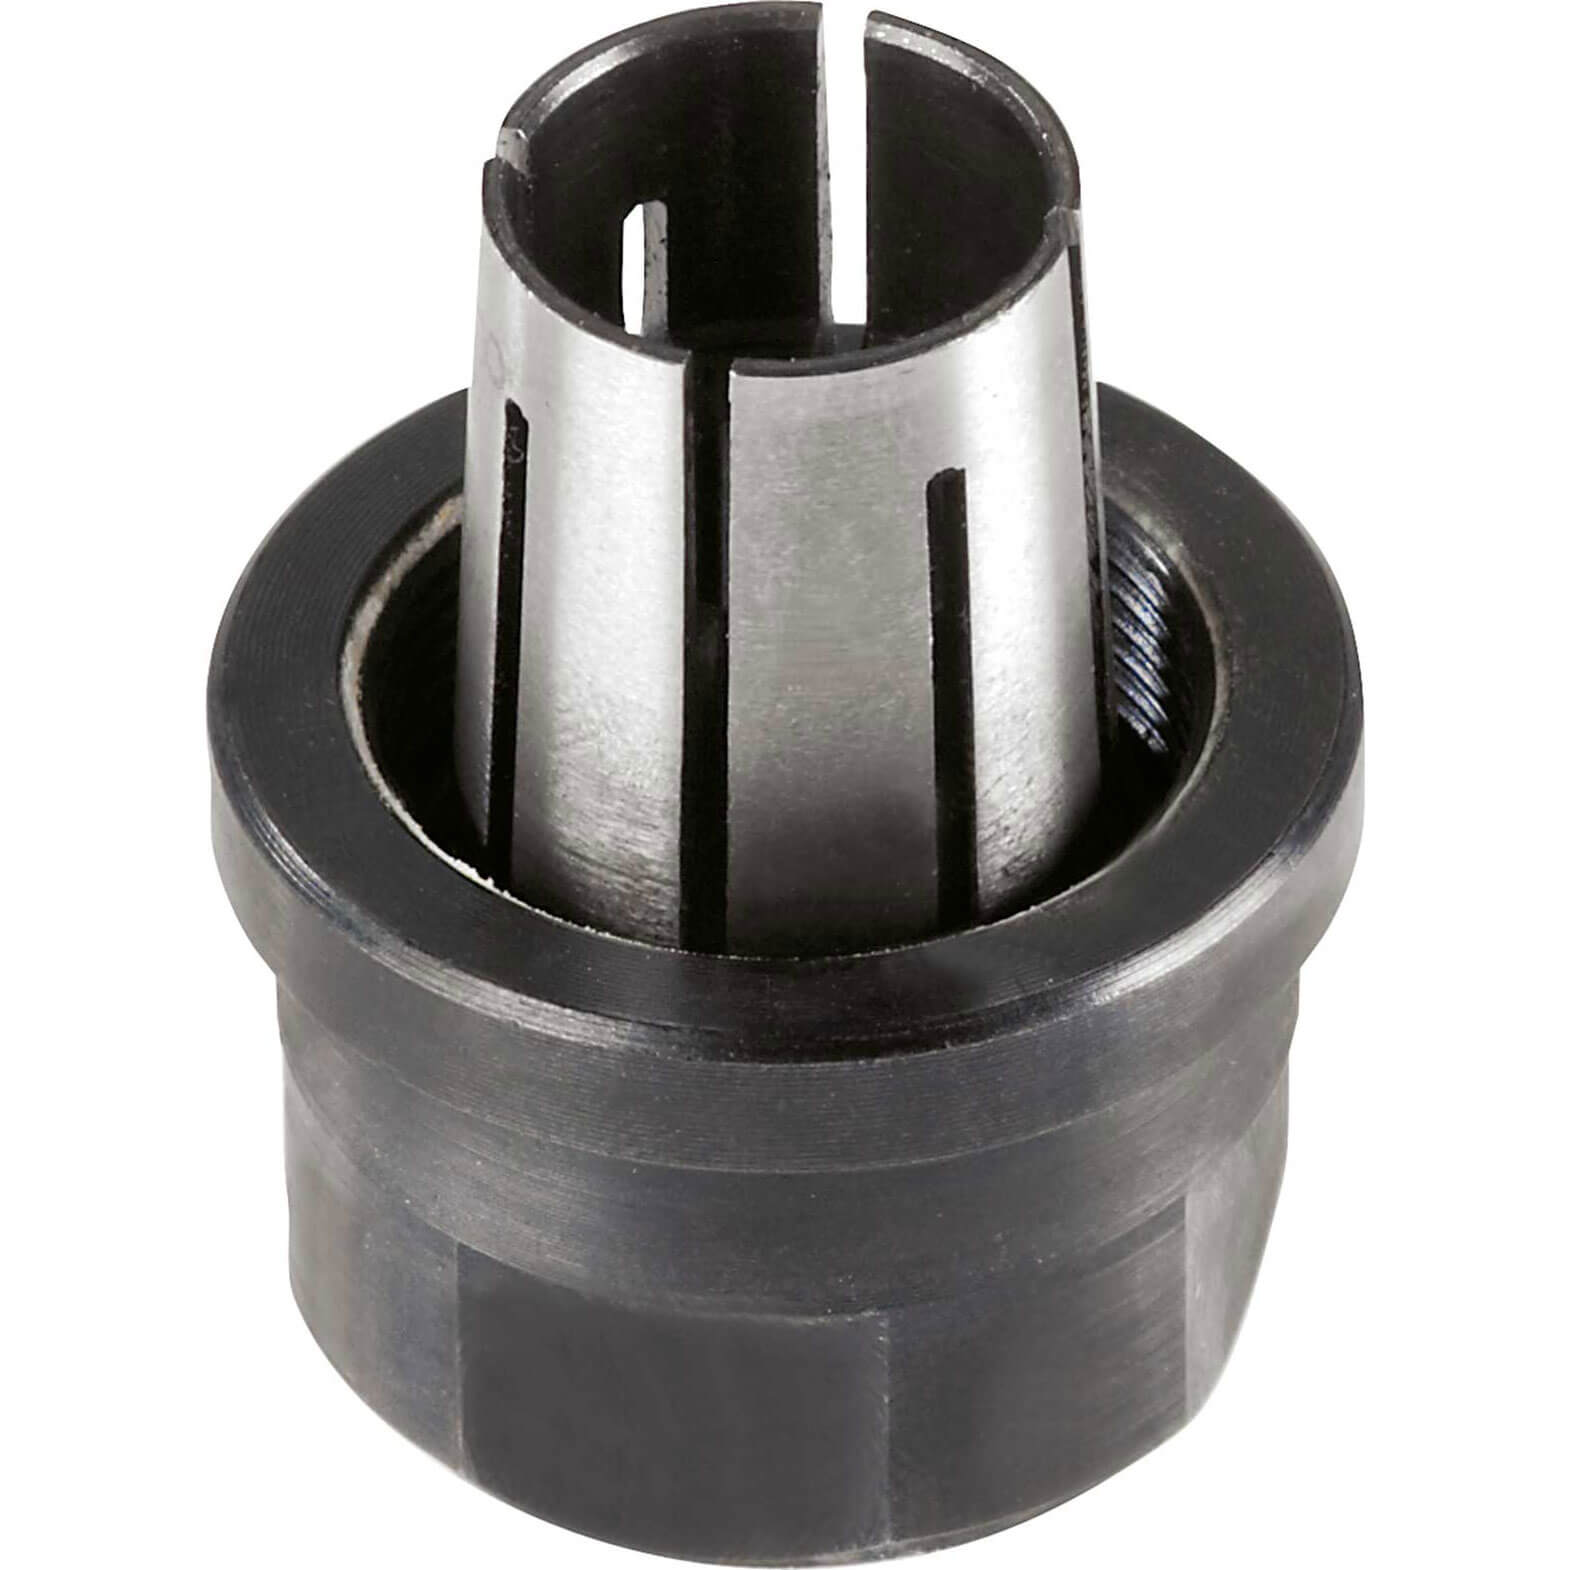 Image of Festool Router Collet For Festool Router OF2200 12mm